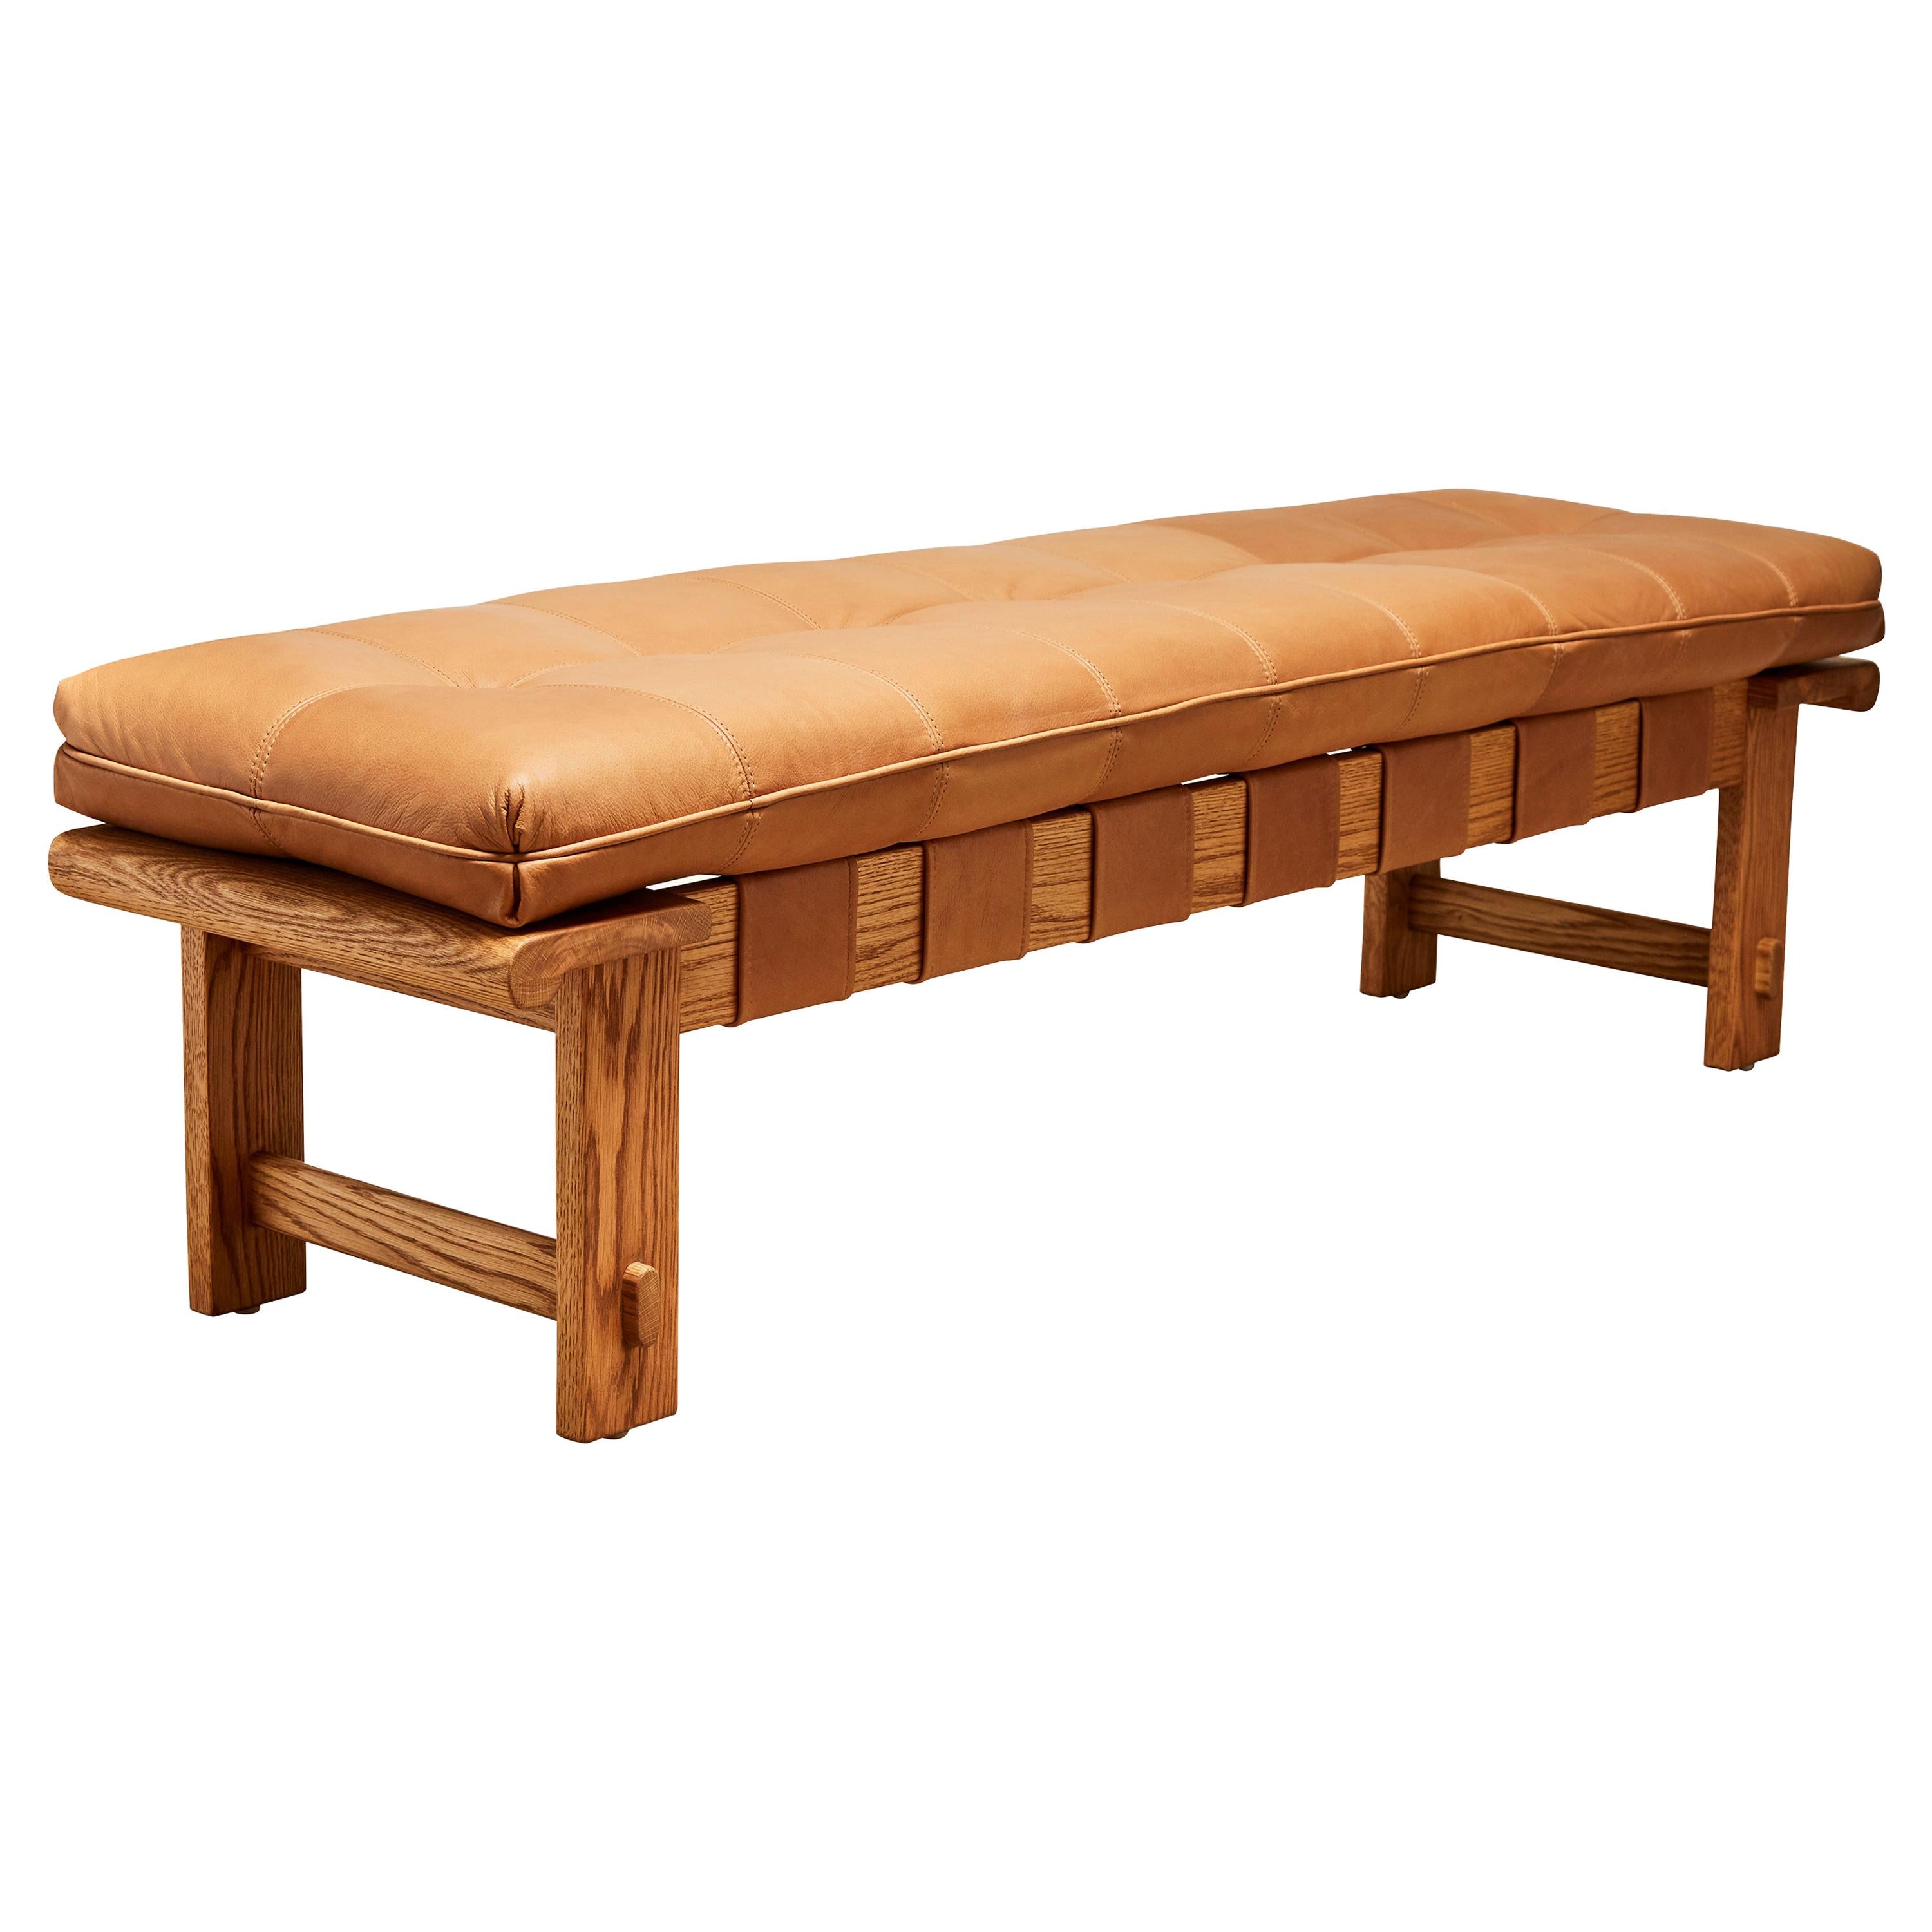 Oiled Oak and Tan Leather Ojai Bench by Lawson-Fenning